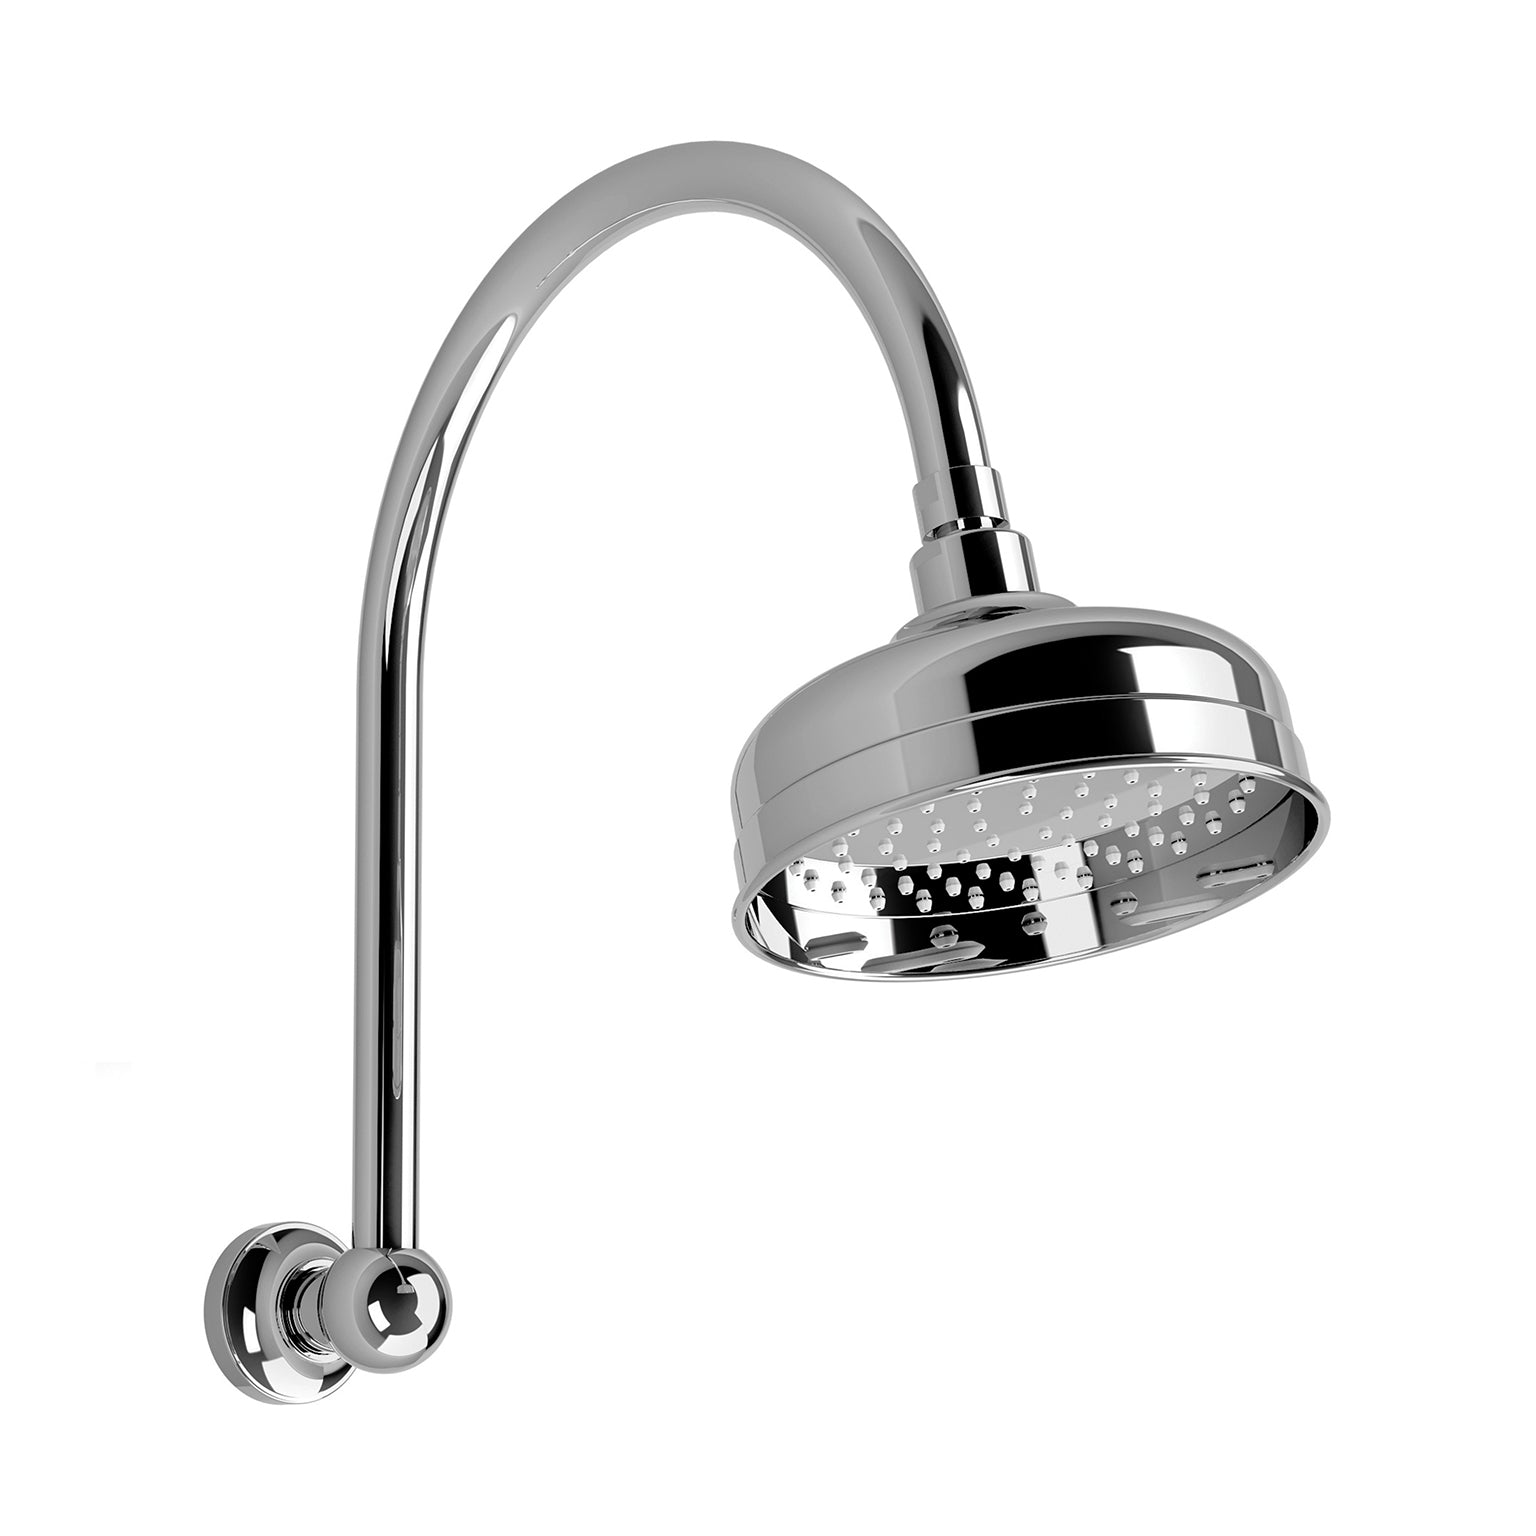 PHOENIX CROMFORD HIGH-RISE SHOWER ARM AND ROSE CHROME 150MM